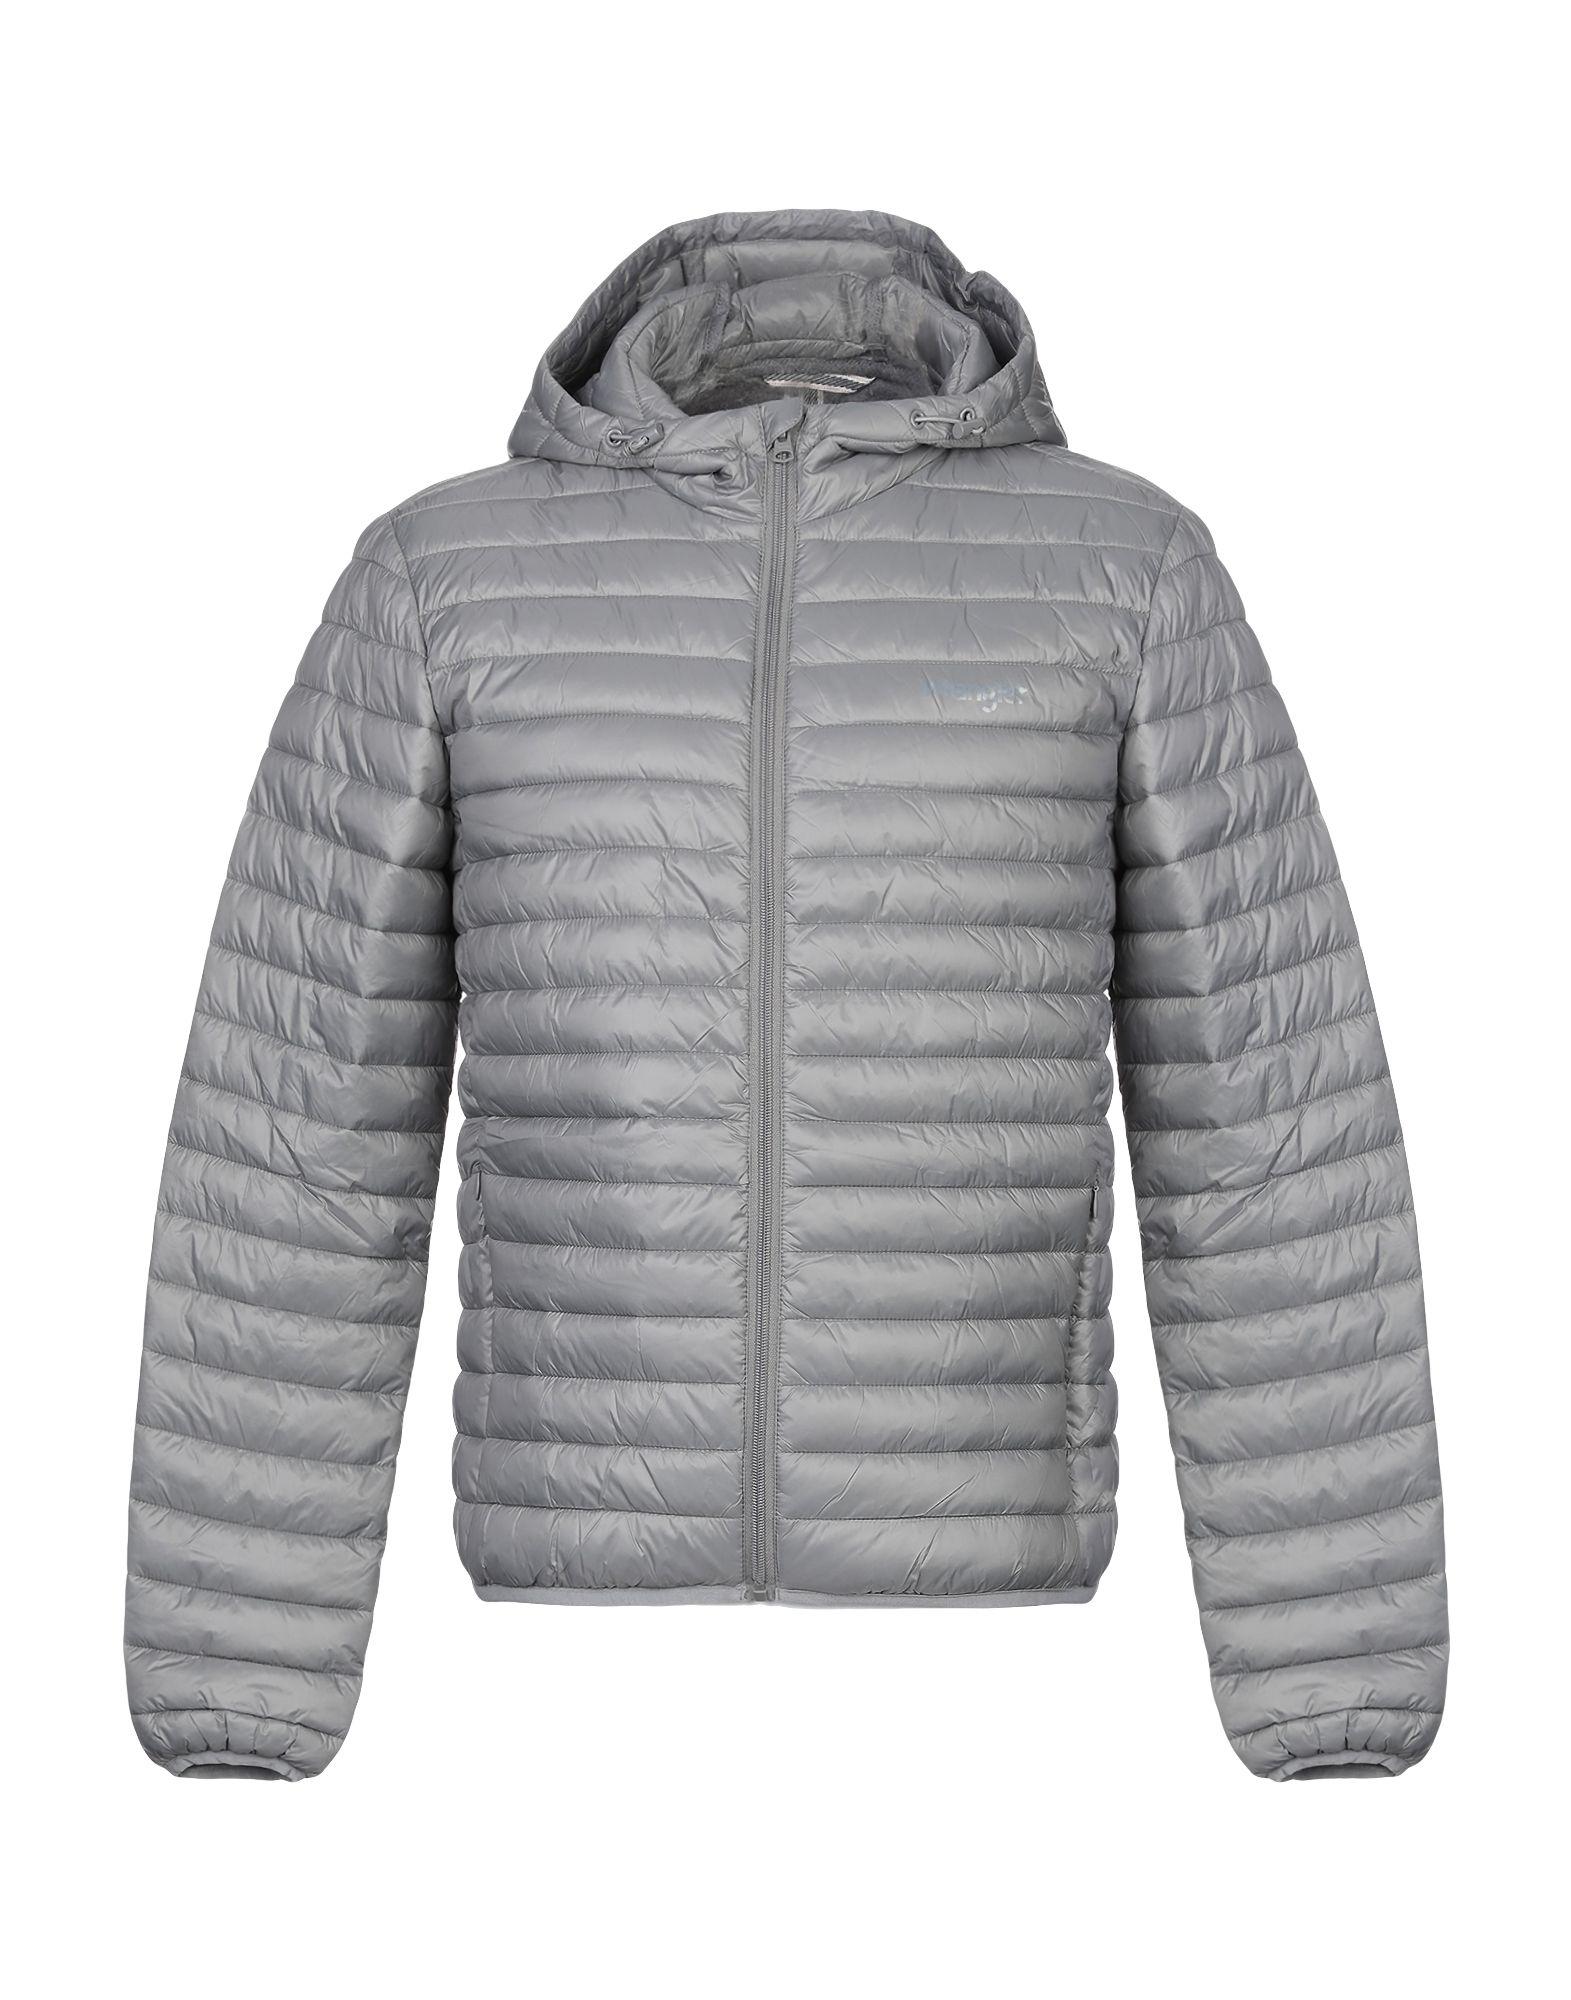 Wrangler Synthetic Down Jacket in Grey (Gray) for Men - Lyst